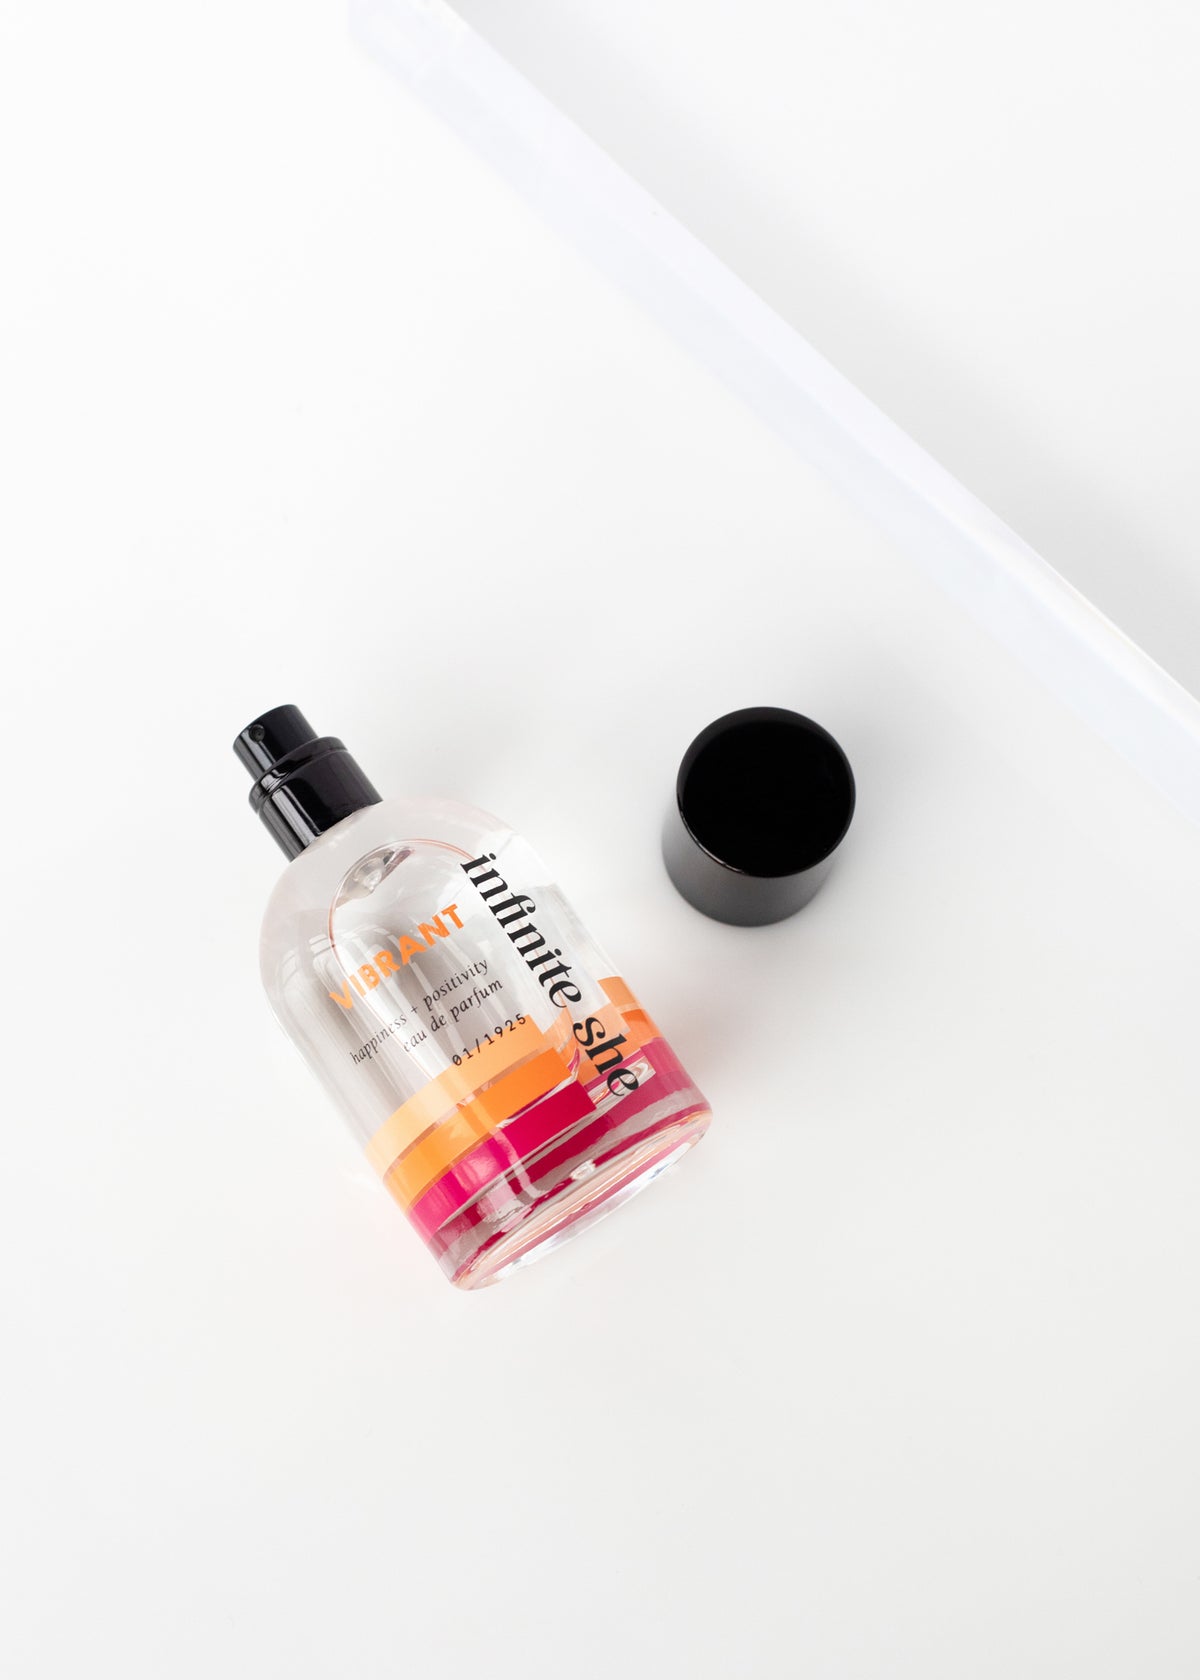 A bottle of Margot Elena's Infinite She Vibrant Eau de Parfum lies on a white surface next to its black cap, angled against a minimalistic background.